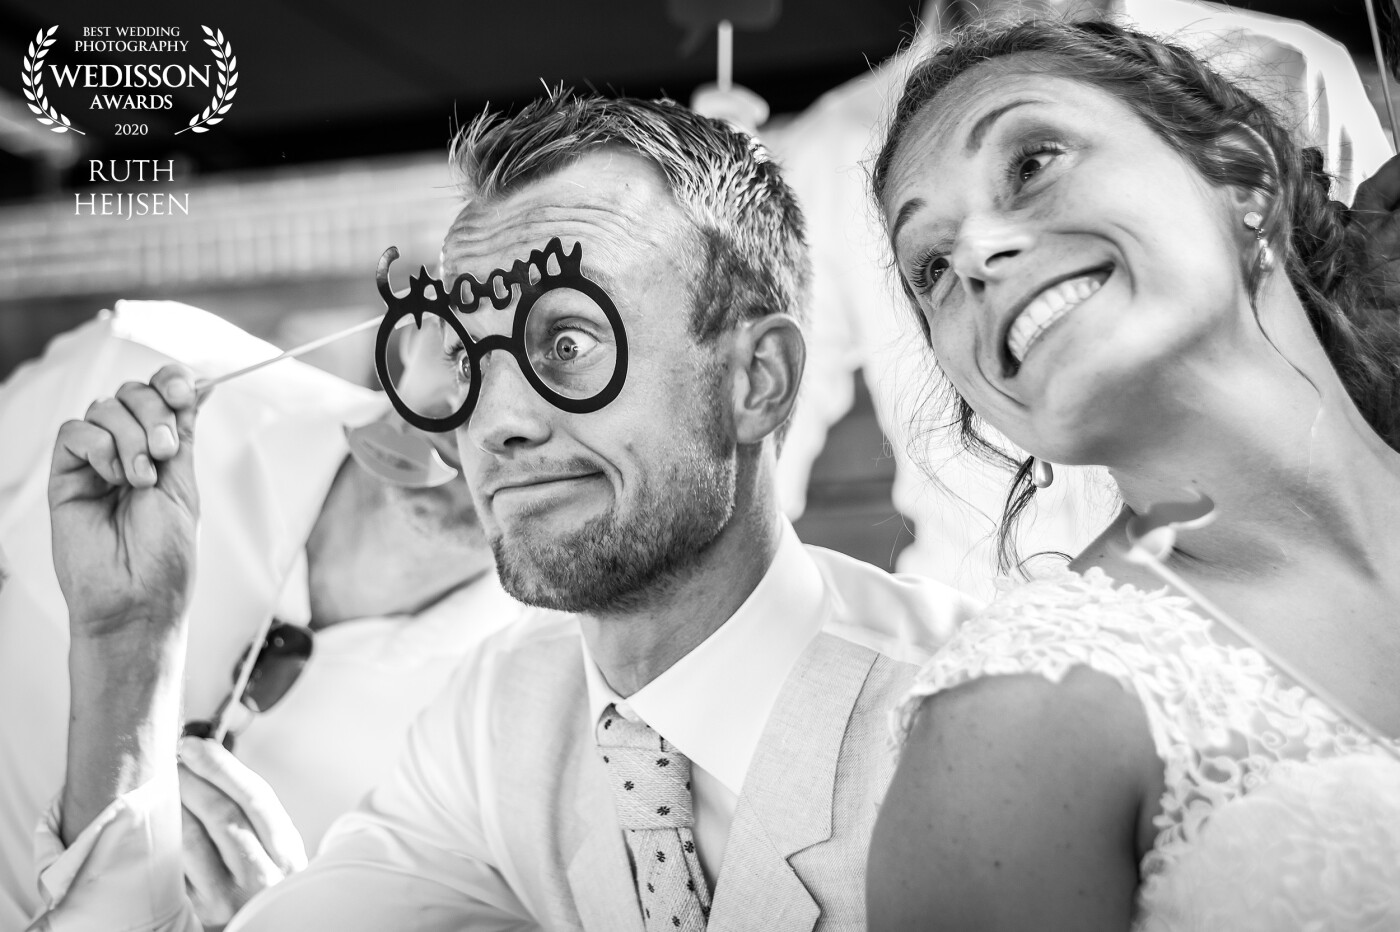 A photobooth makes you do funny things and make funny faces. This newlywed couple enjoyed it so much, they almost couldn't get enough of it!